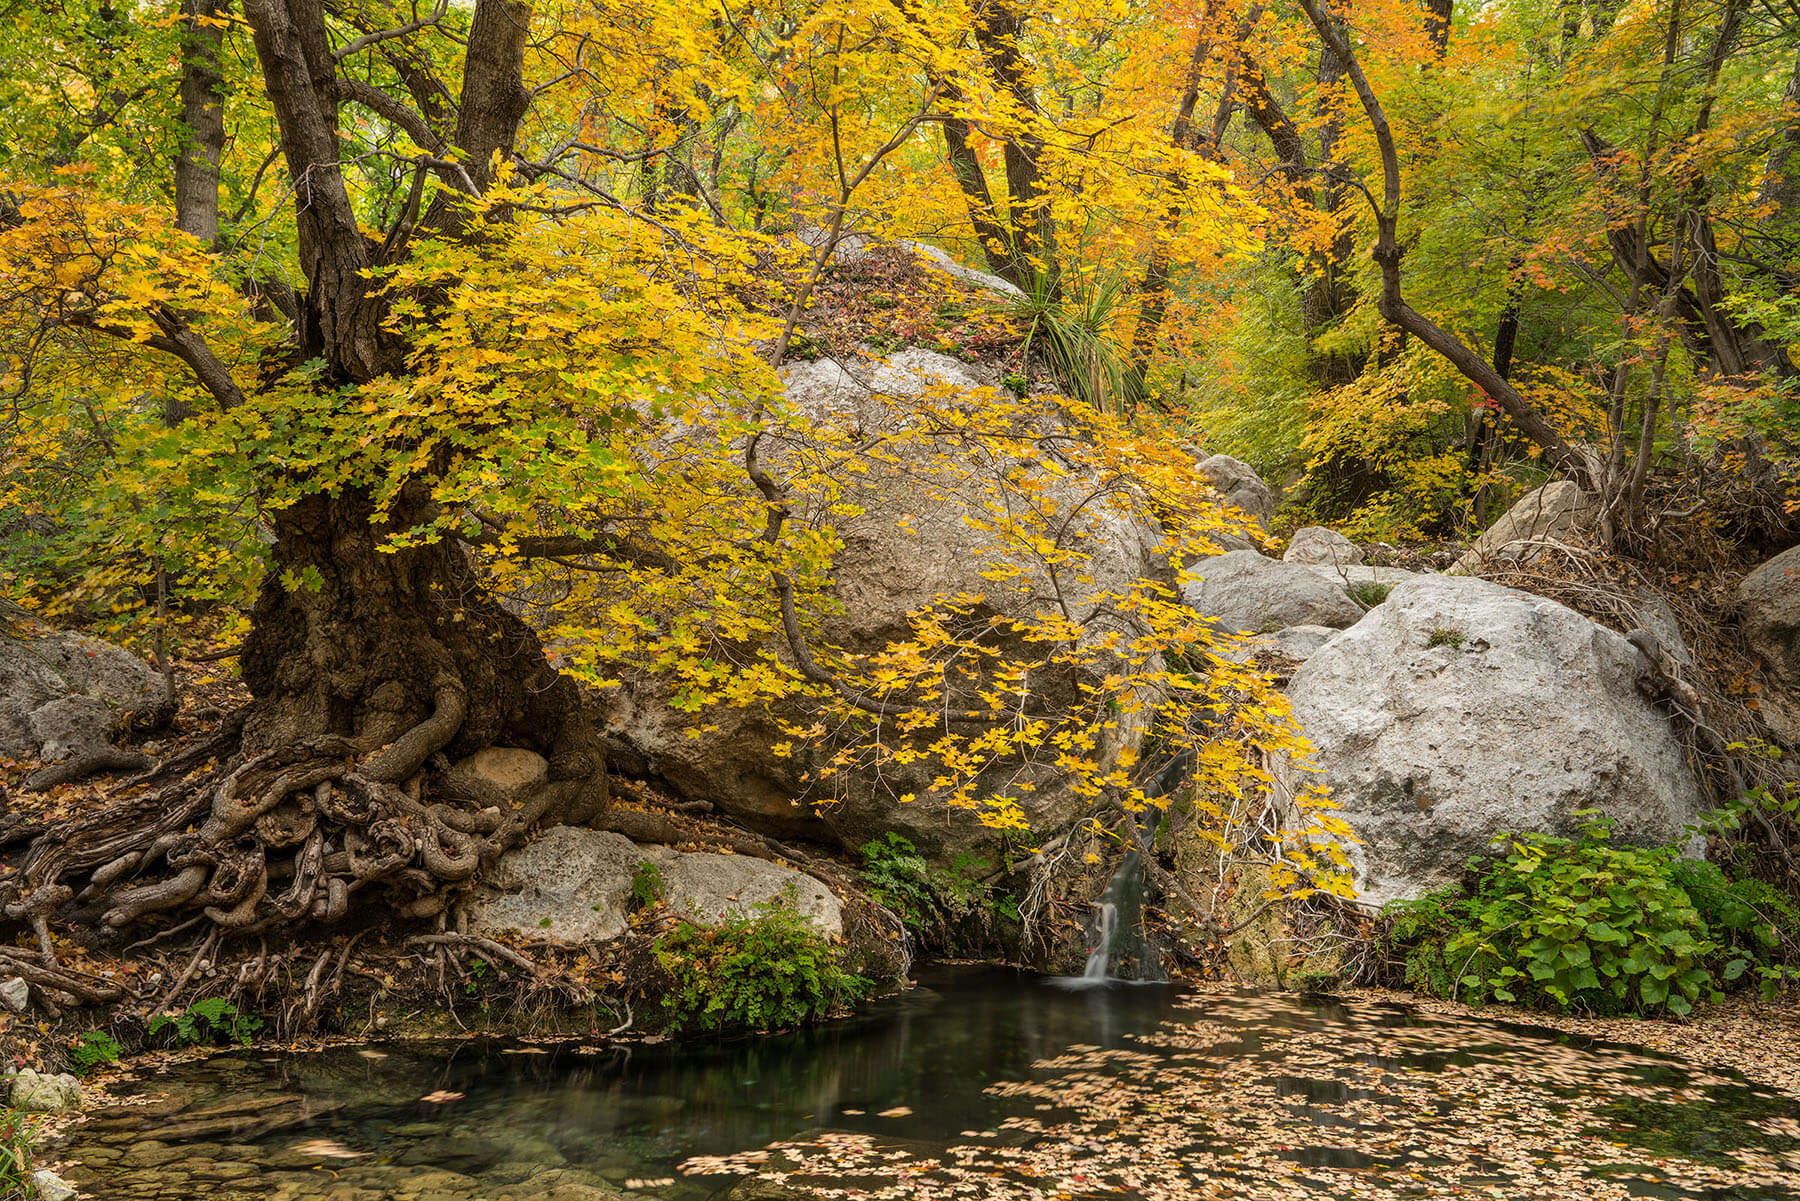 Yellow and orange leaves adorn a rock face and clear spring pool